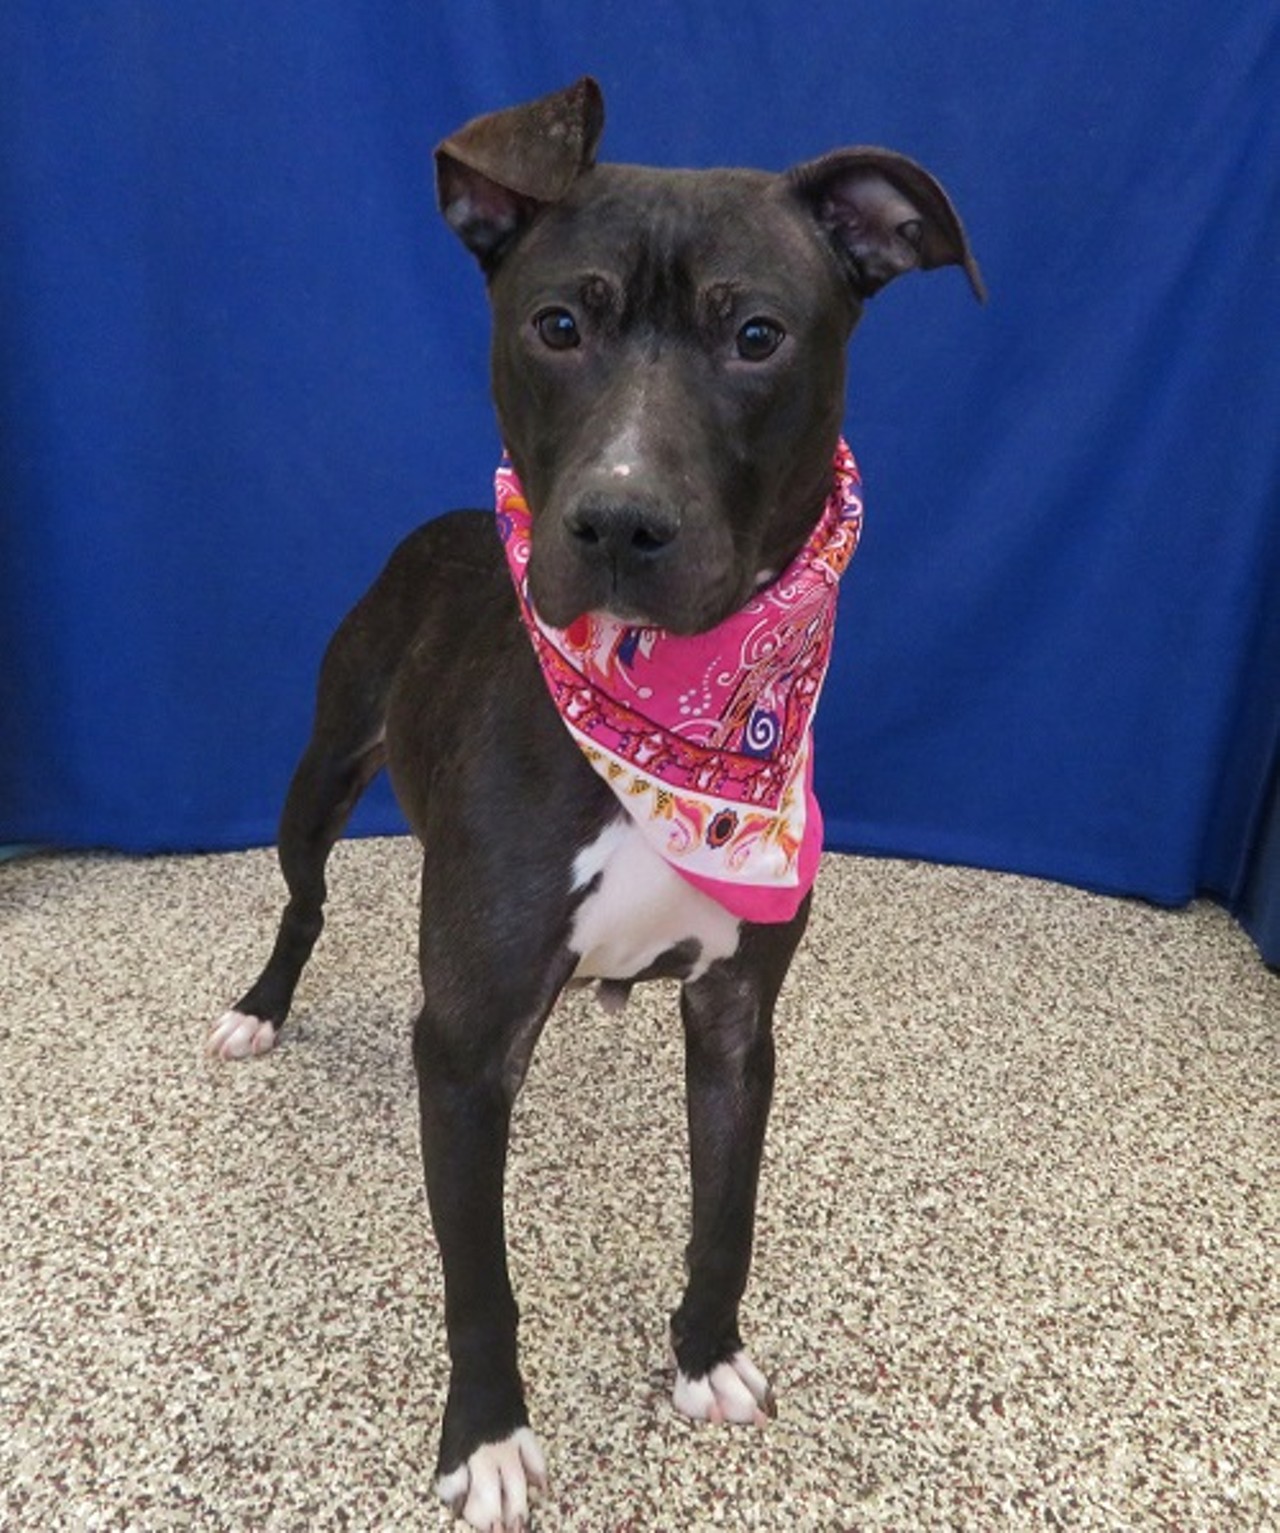 NAME: Norah
GENDER: Female
BREED: Pit Bull Terrier
AGE: 2 years, 2 months
WEIGHT: 42 pounds
SPECIAL CONSIDERATIONS: Prefers older children
REASON I CAME TO MHS: Homeless in Detroit
LOCATION: Rochester Hills Center for Animal Care
ID NUMBER: 861842